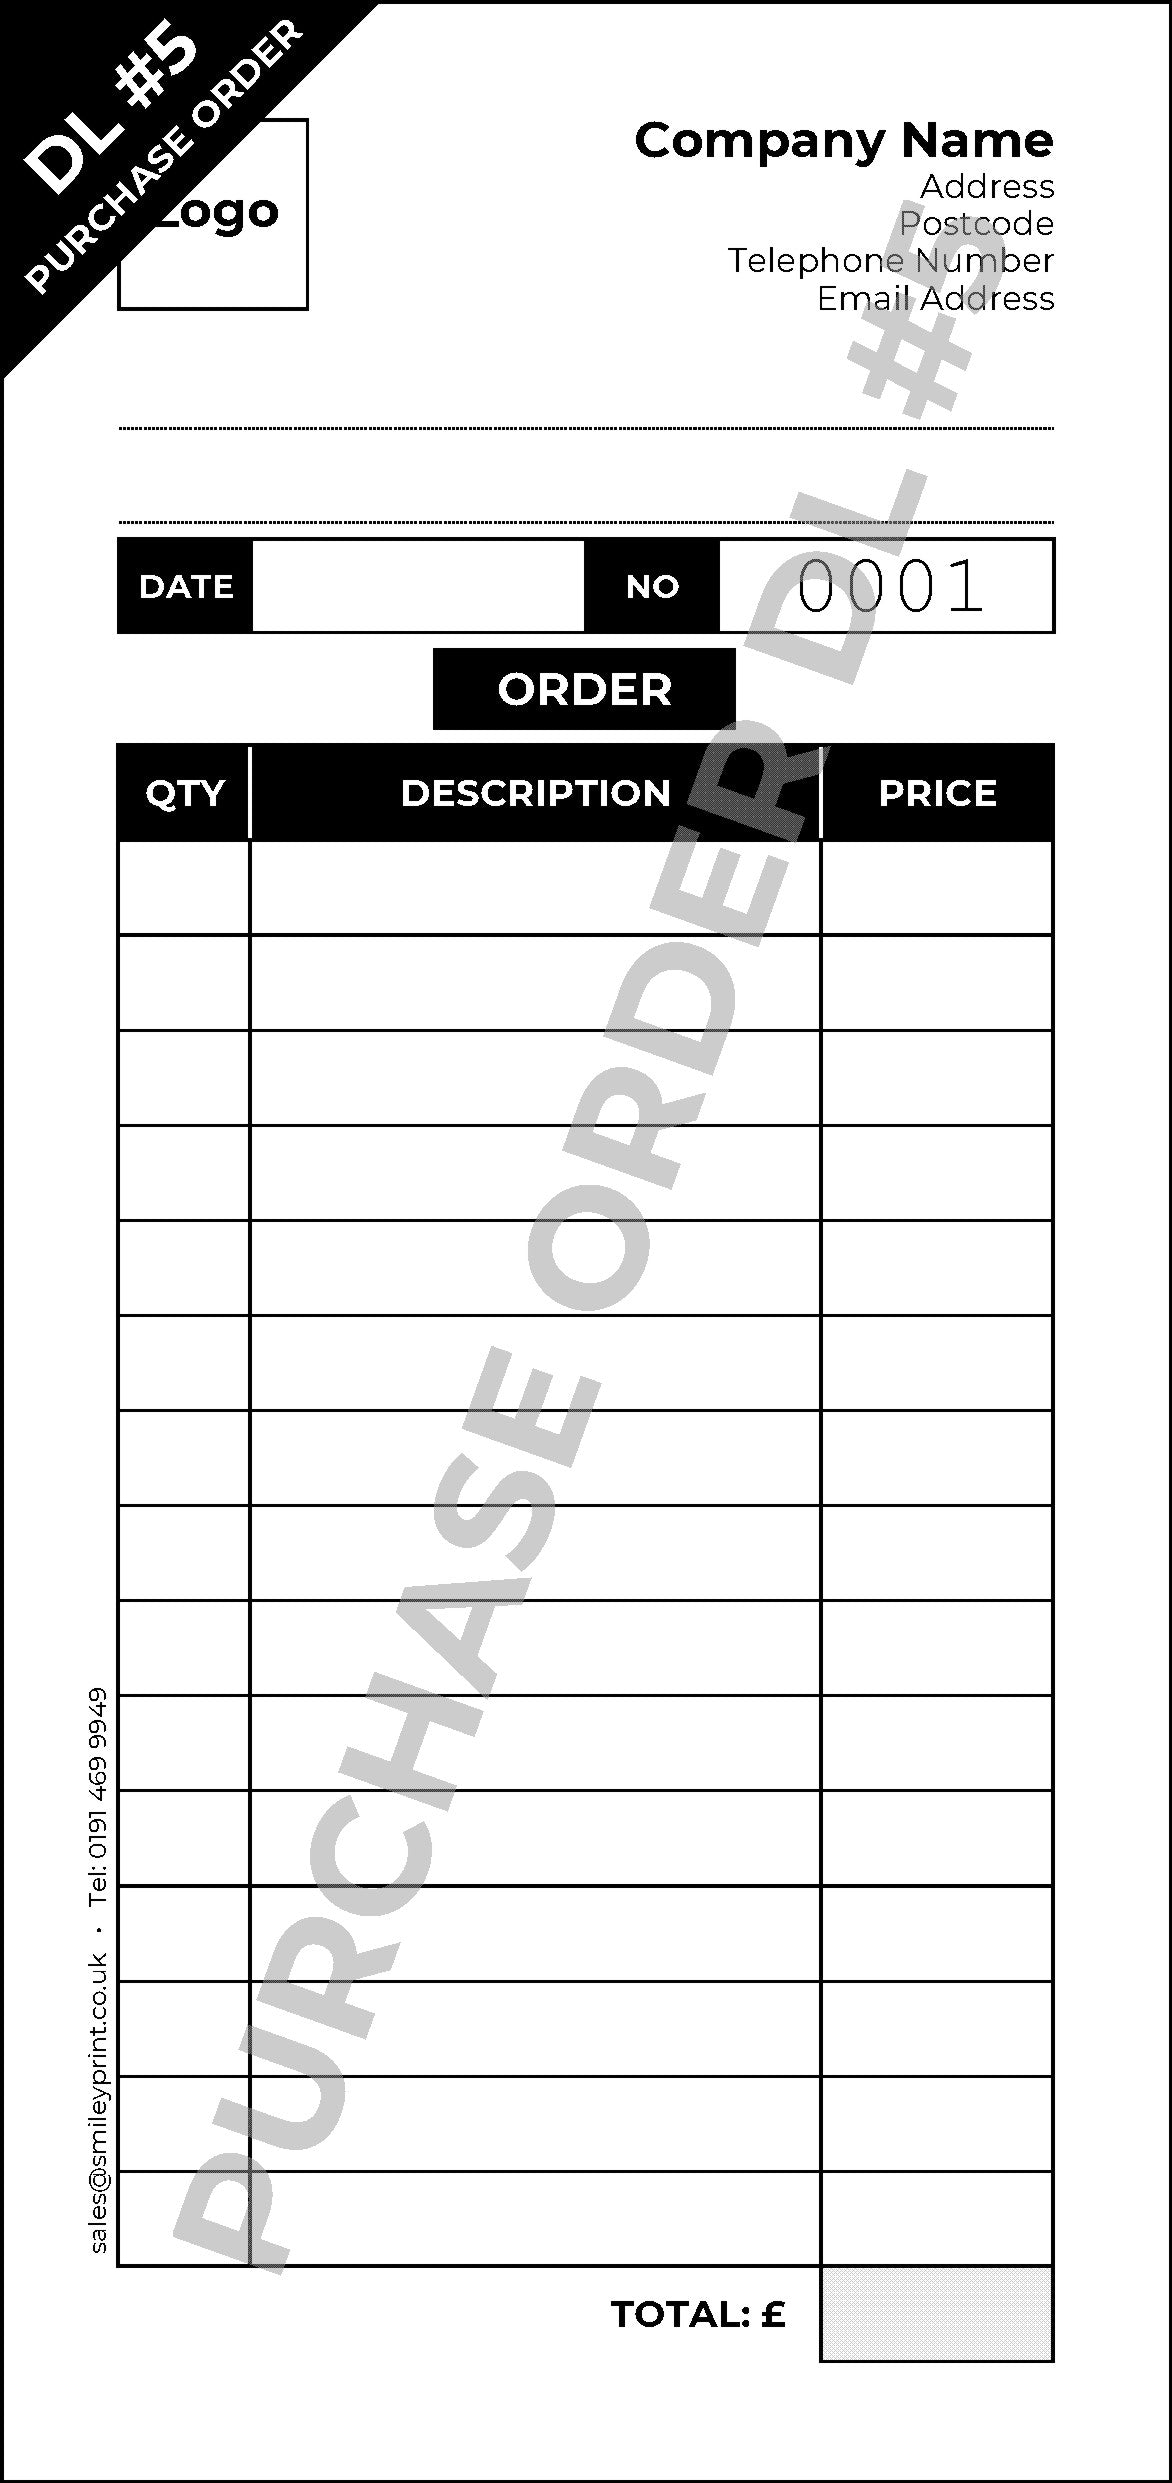 Purchase Order Templates